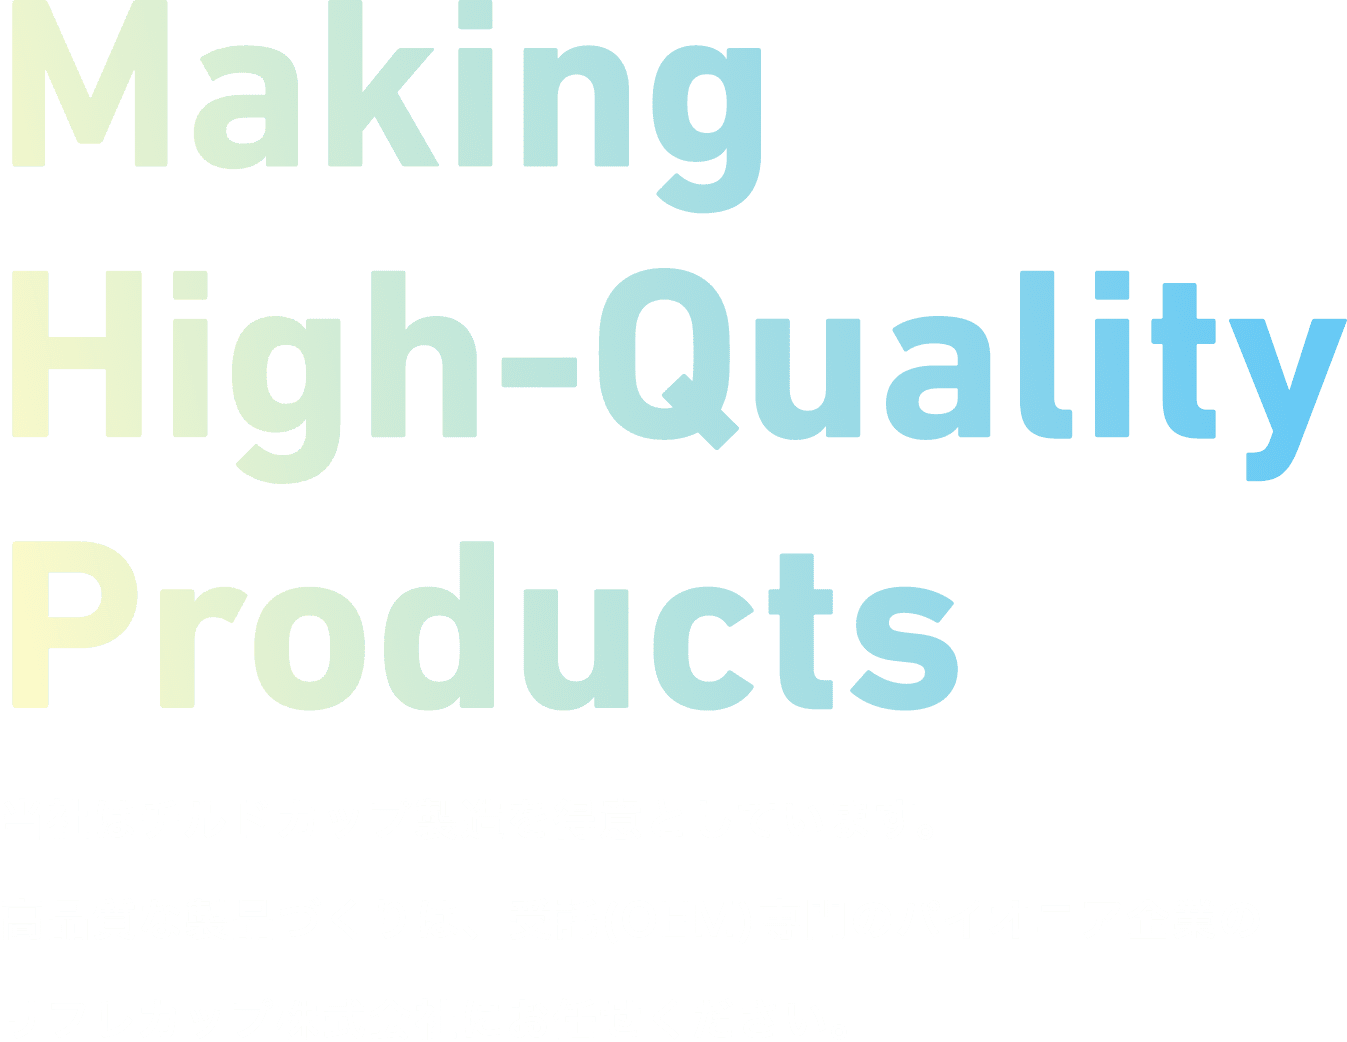 Making high-quality products